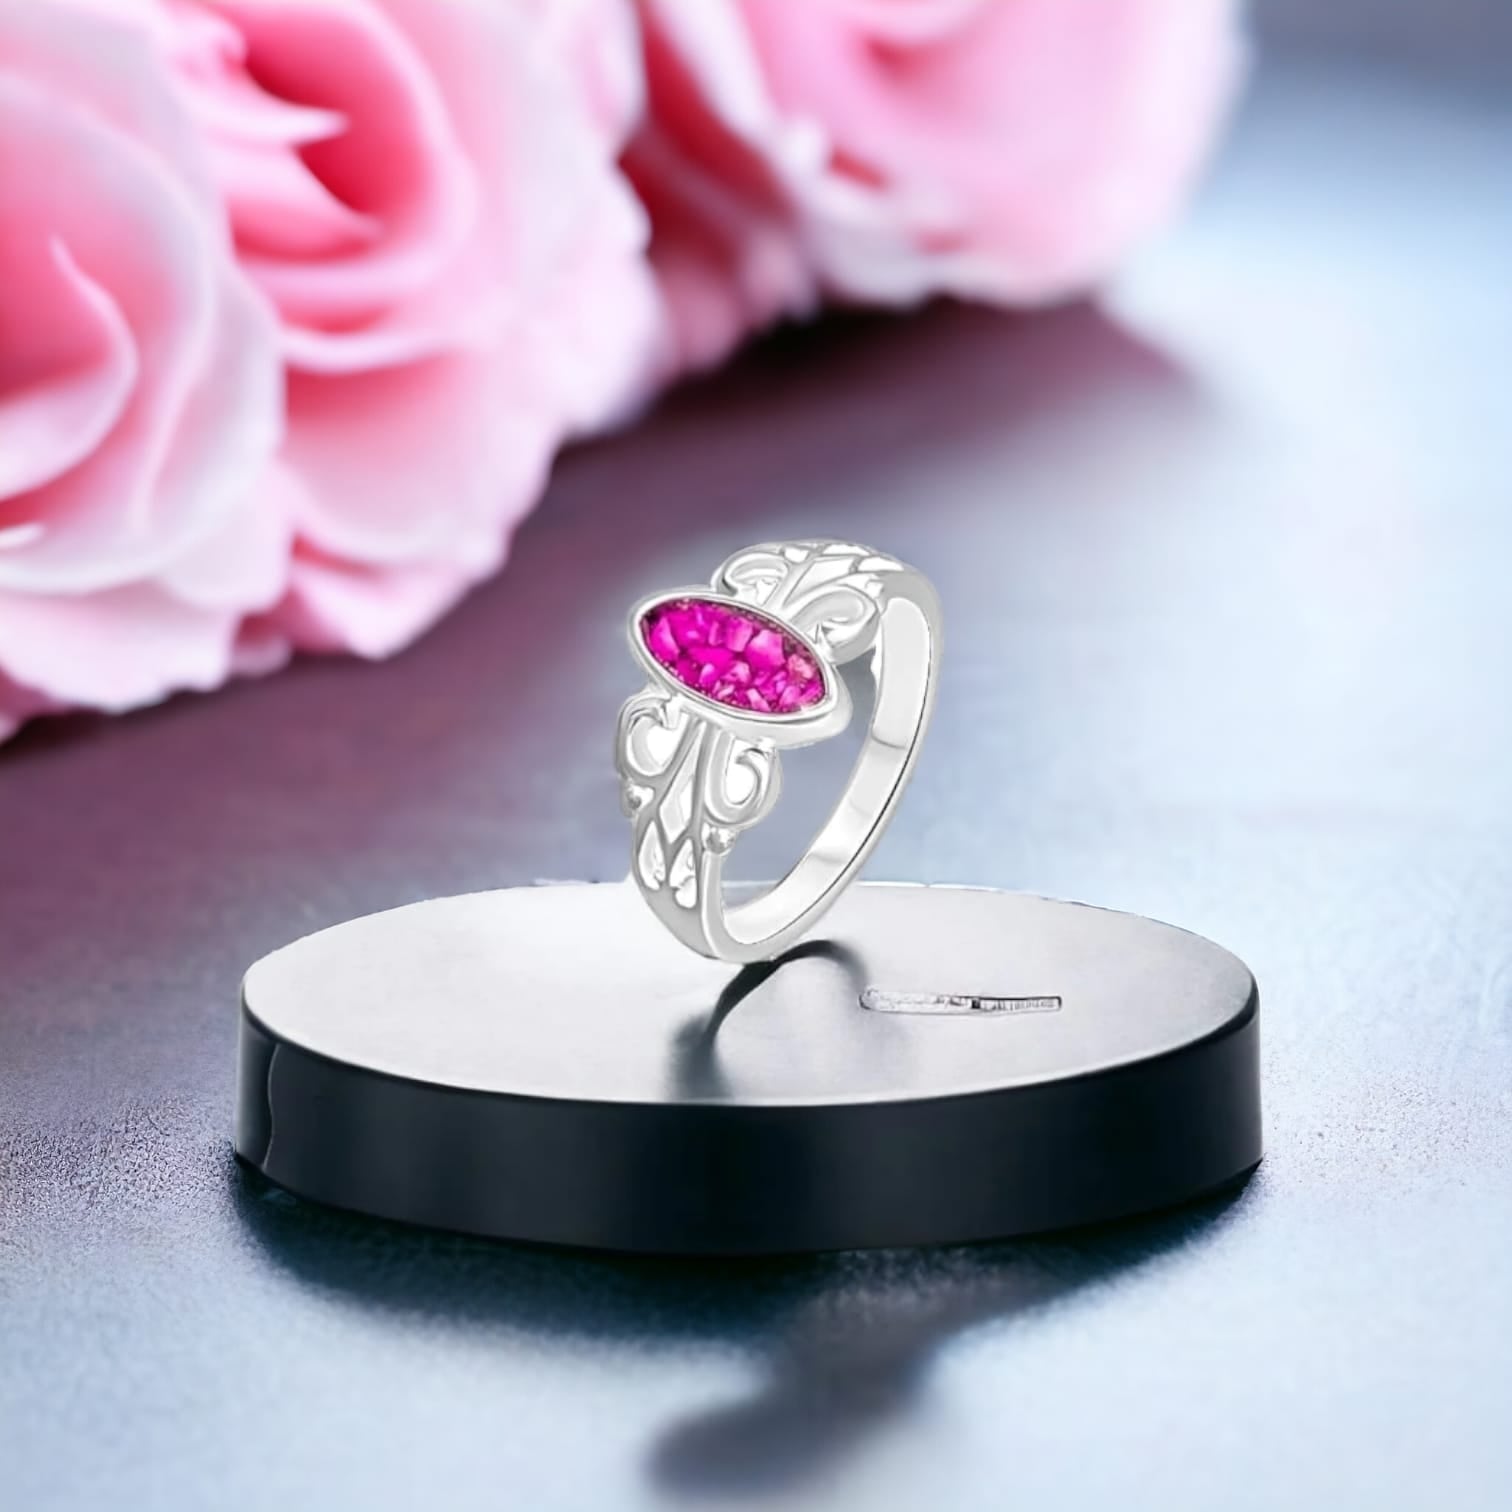 NEW SK- Striking memorial ring - colour - choice 2-3 weeks ... introductory price